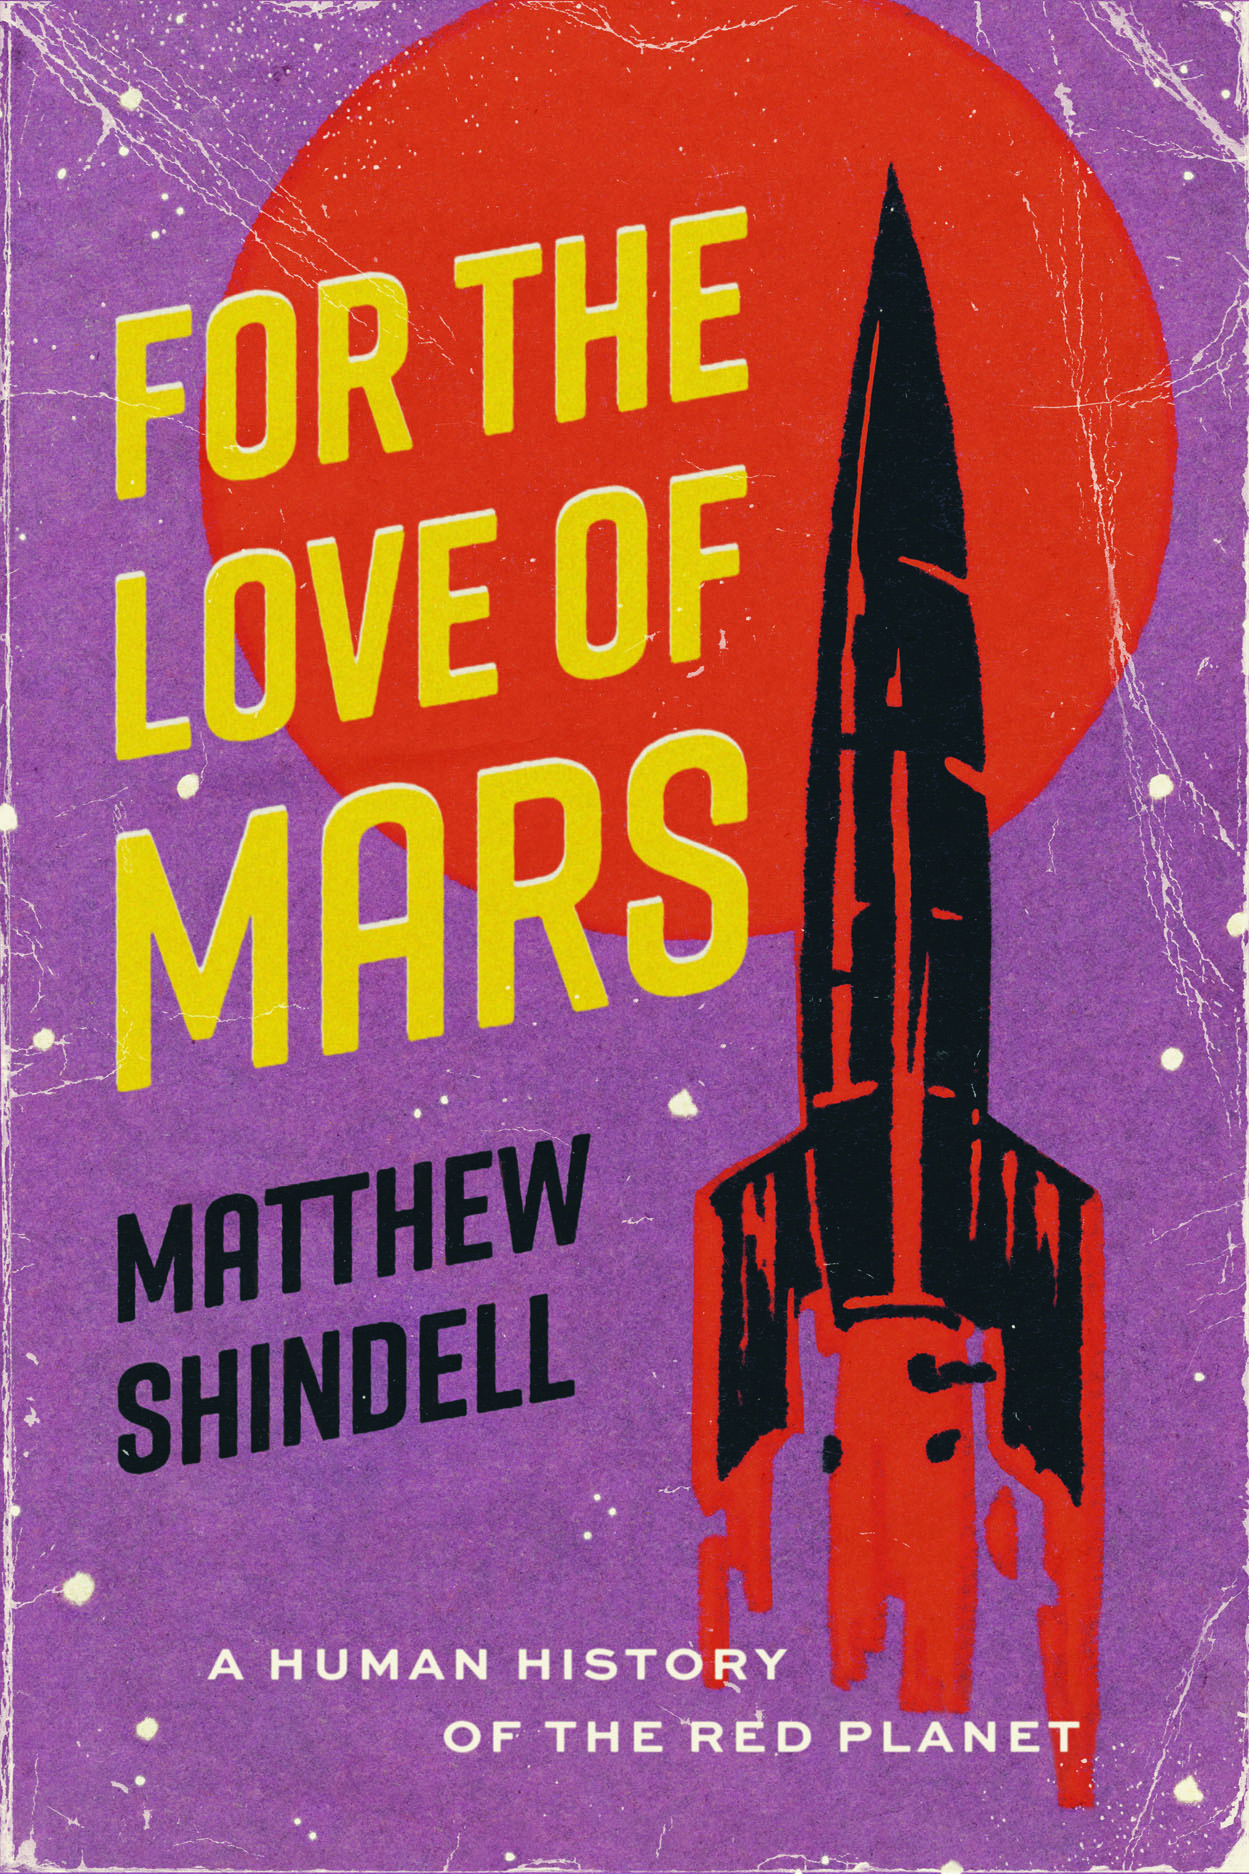 the of Mars: A Human History of the Red Planet, Shindell